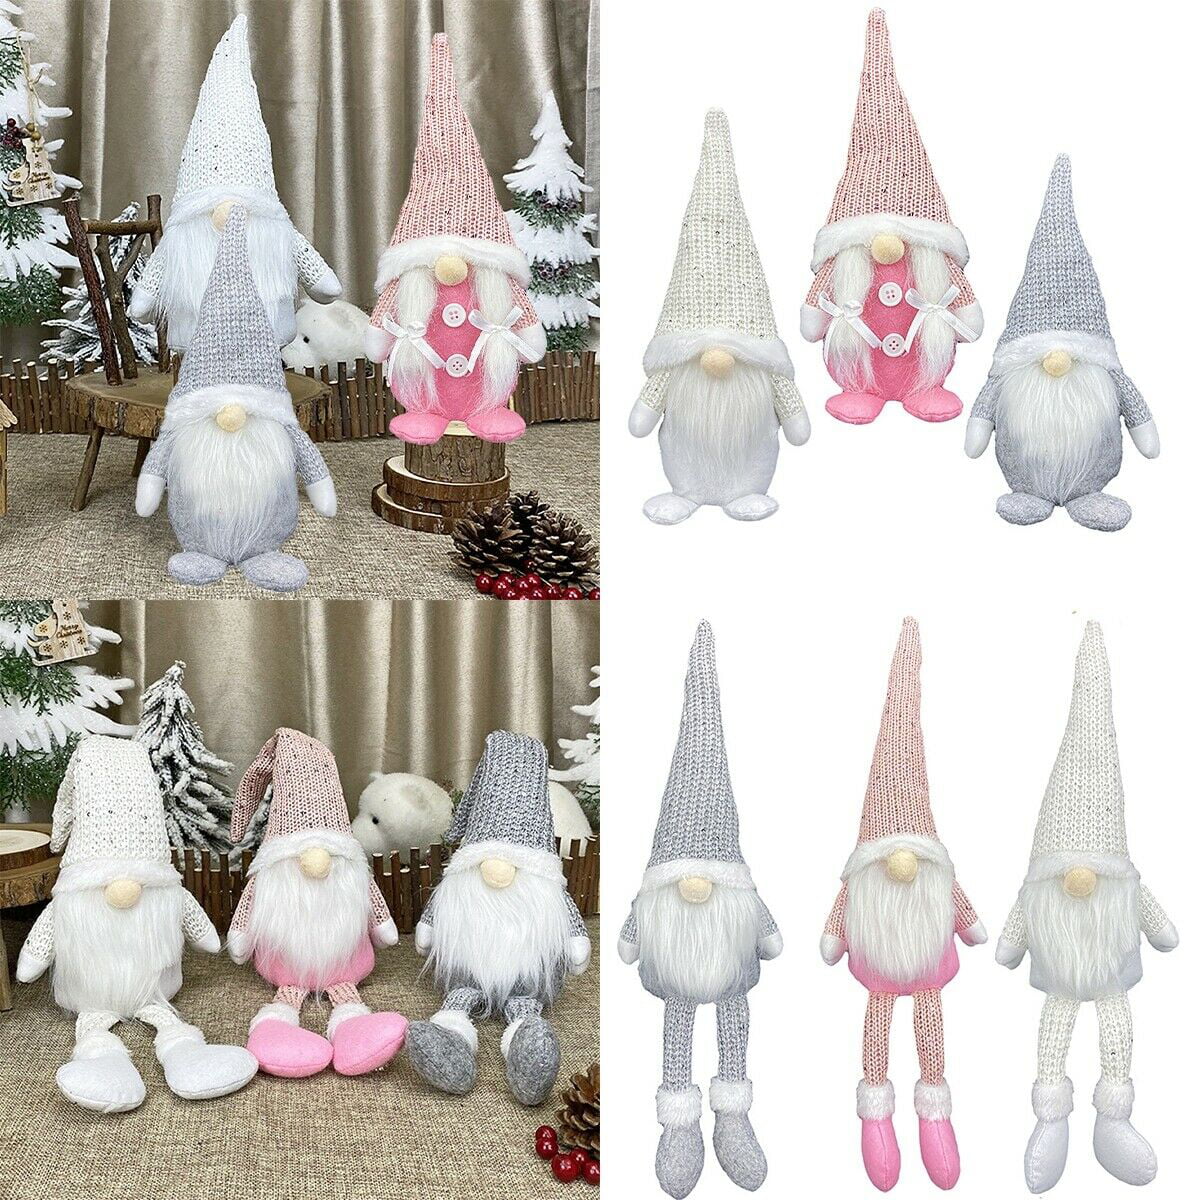 Details about   Gnome Plush Doll Gift Pendant Hanging Ornament Party Tree Xmas Decor M6P2 